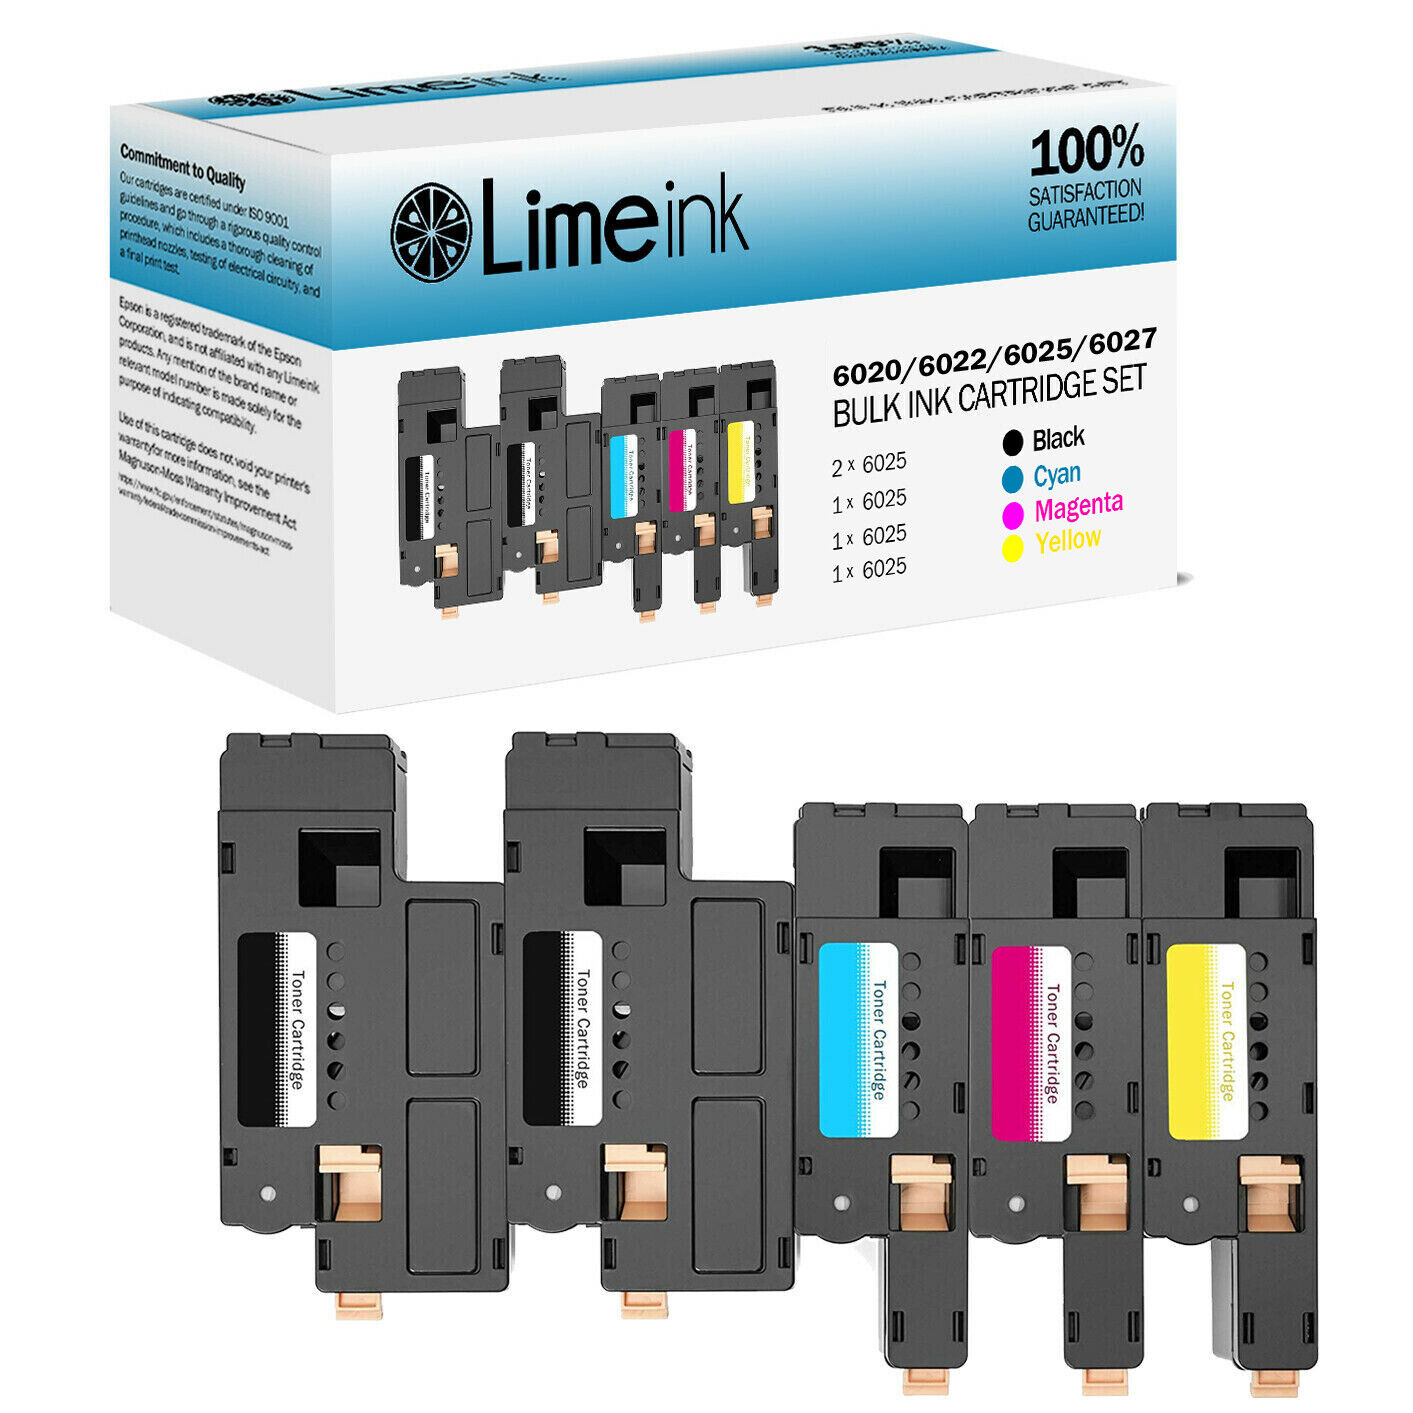 5 Compatible Toner Cartridges for Xerox WorkCentre 6025 6027 Phaser 6020 6022